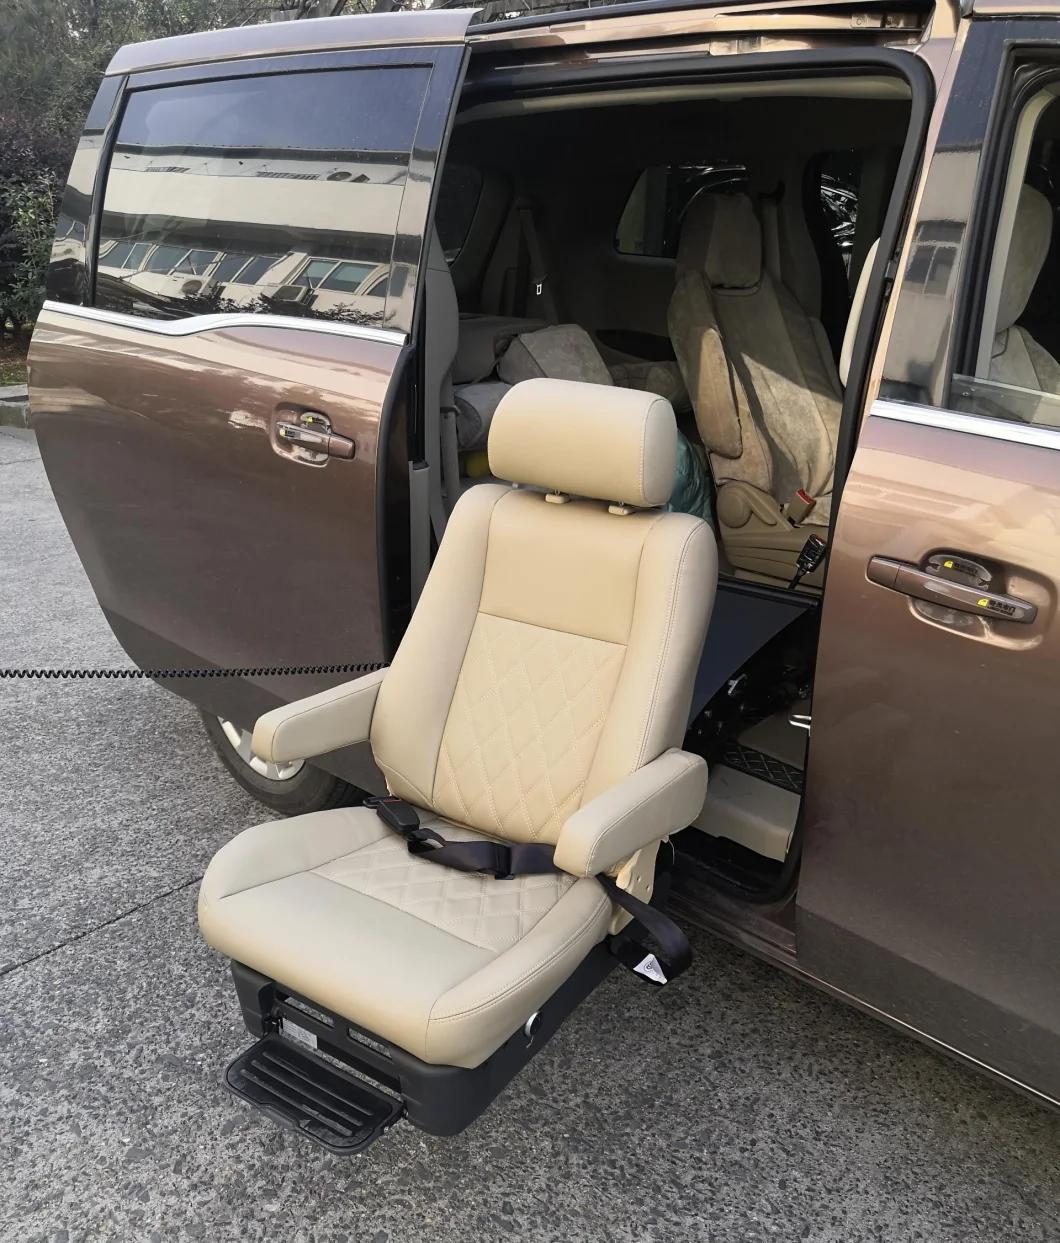 2019 Hight Quality Turning Seat for Car Loading 120kg for Disabled People